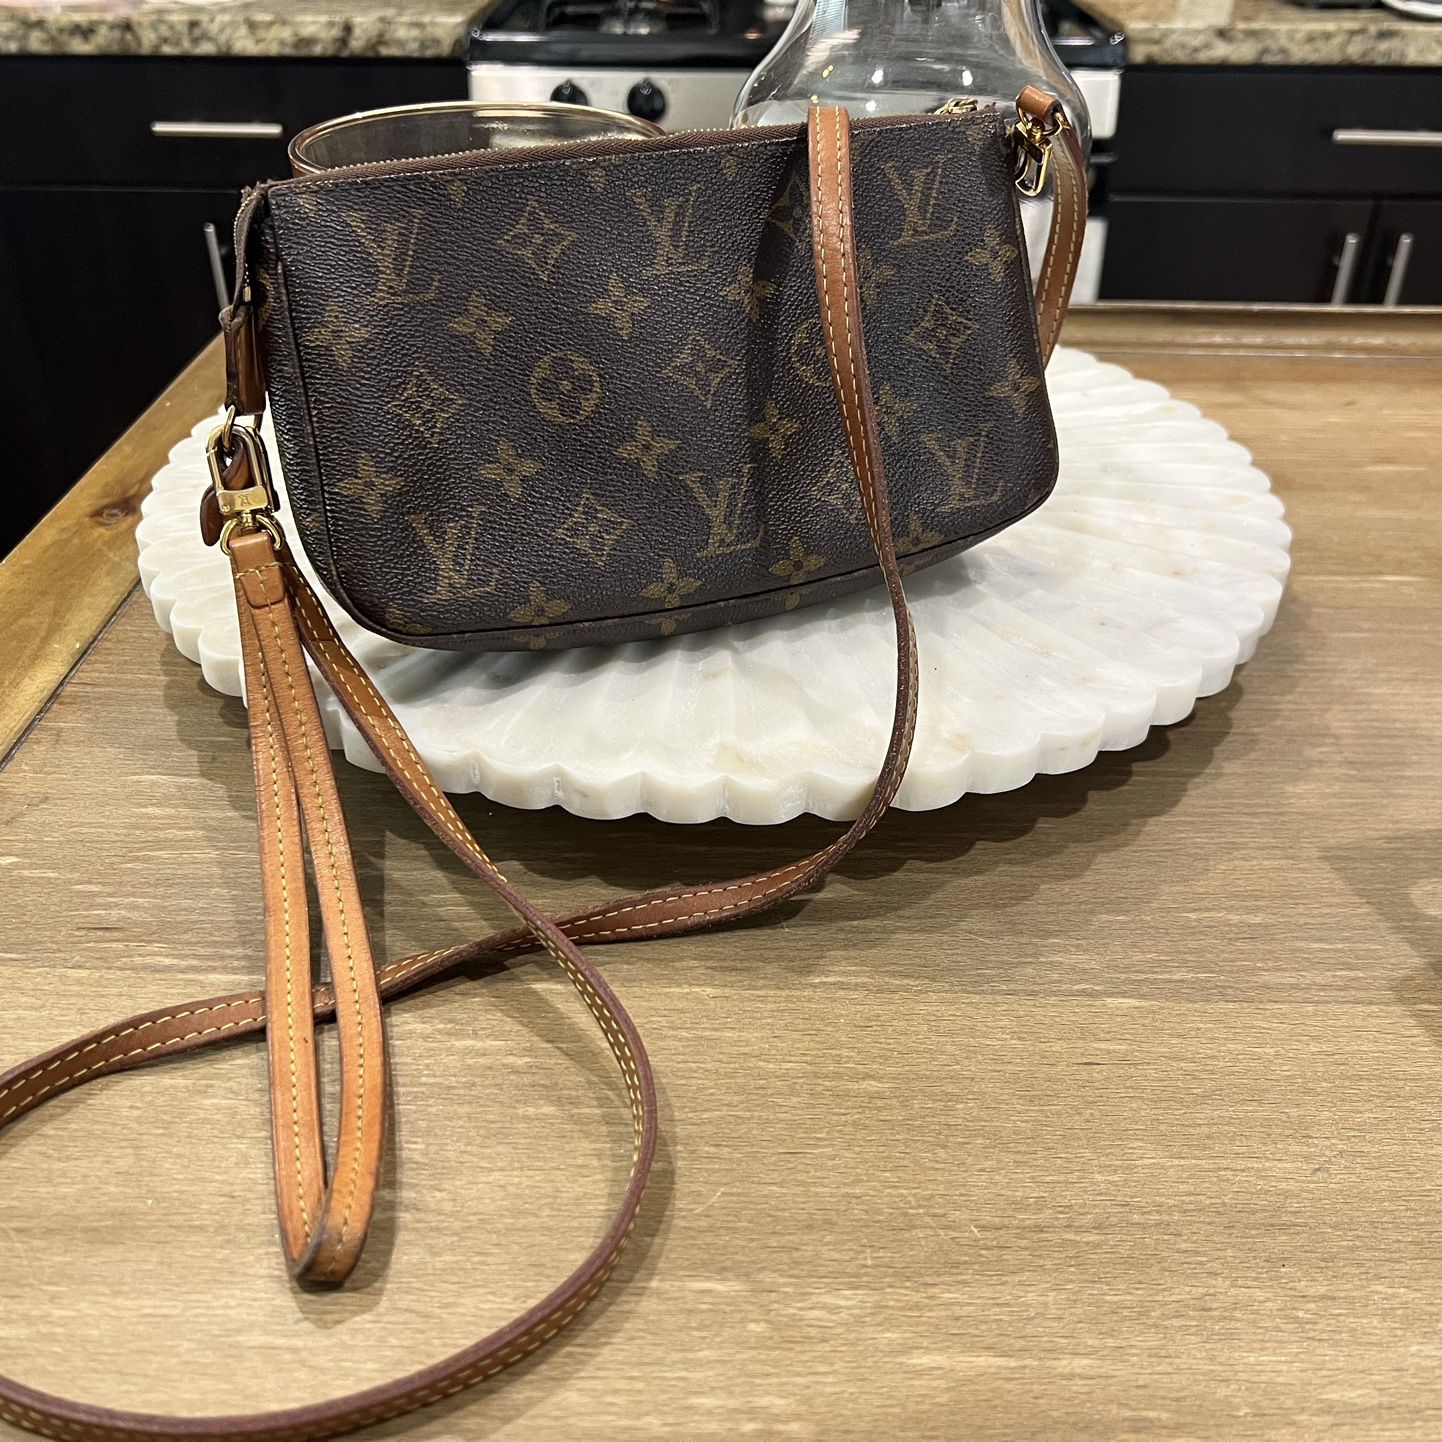 BRAND NEW AUTHENTIC LV LOUIS VUITTON VACHETTA LEATHER CROSSBODY STRAP RED  for Sale in New York, NY - OfferUp